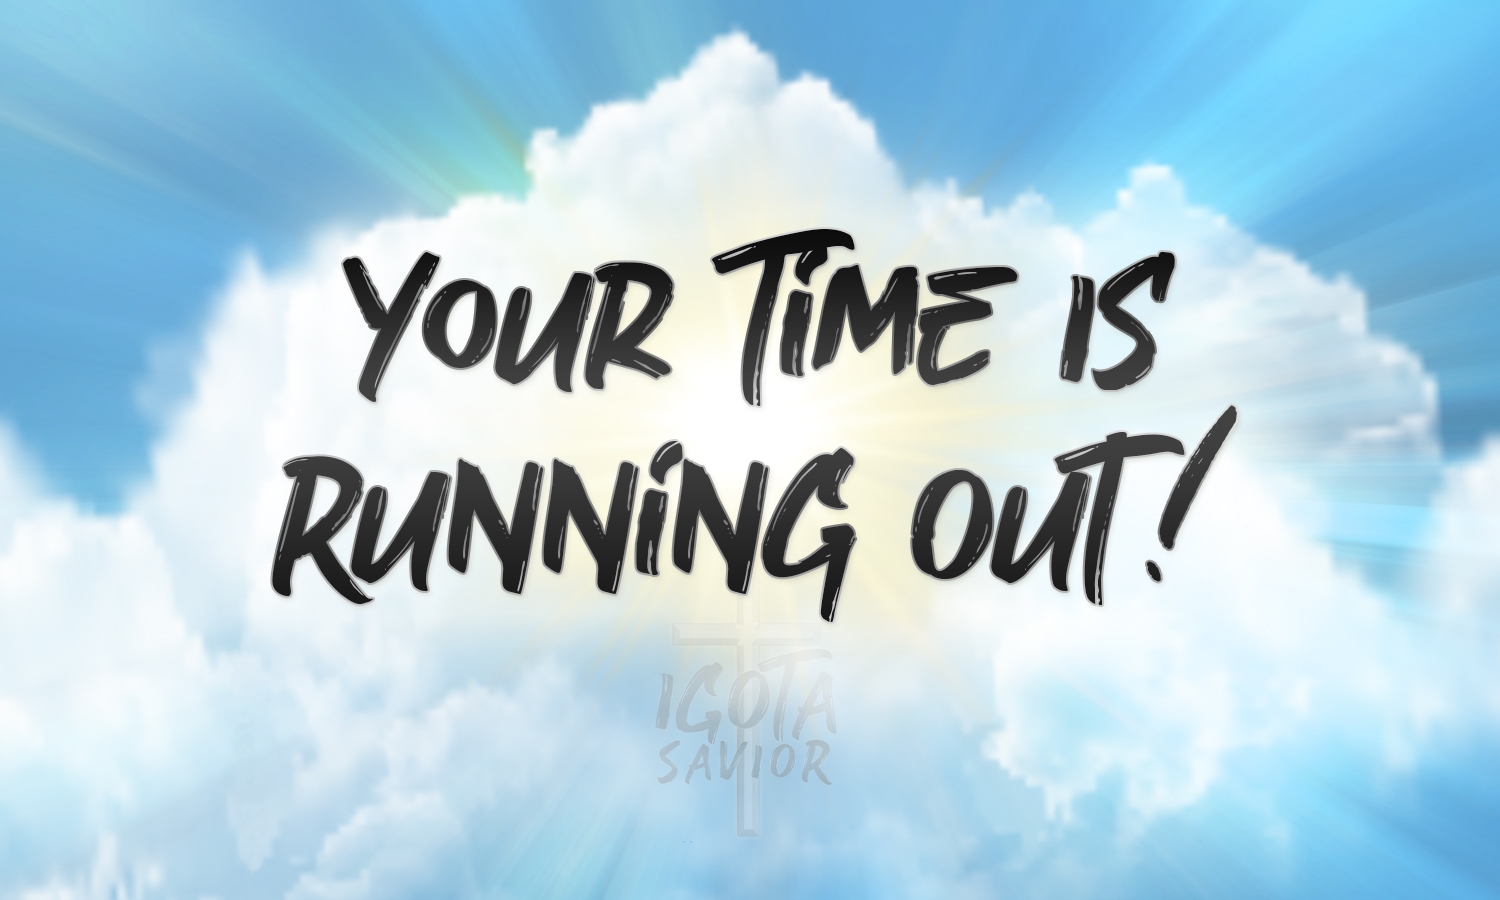 Your Time Is Running Out!